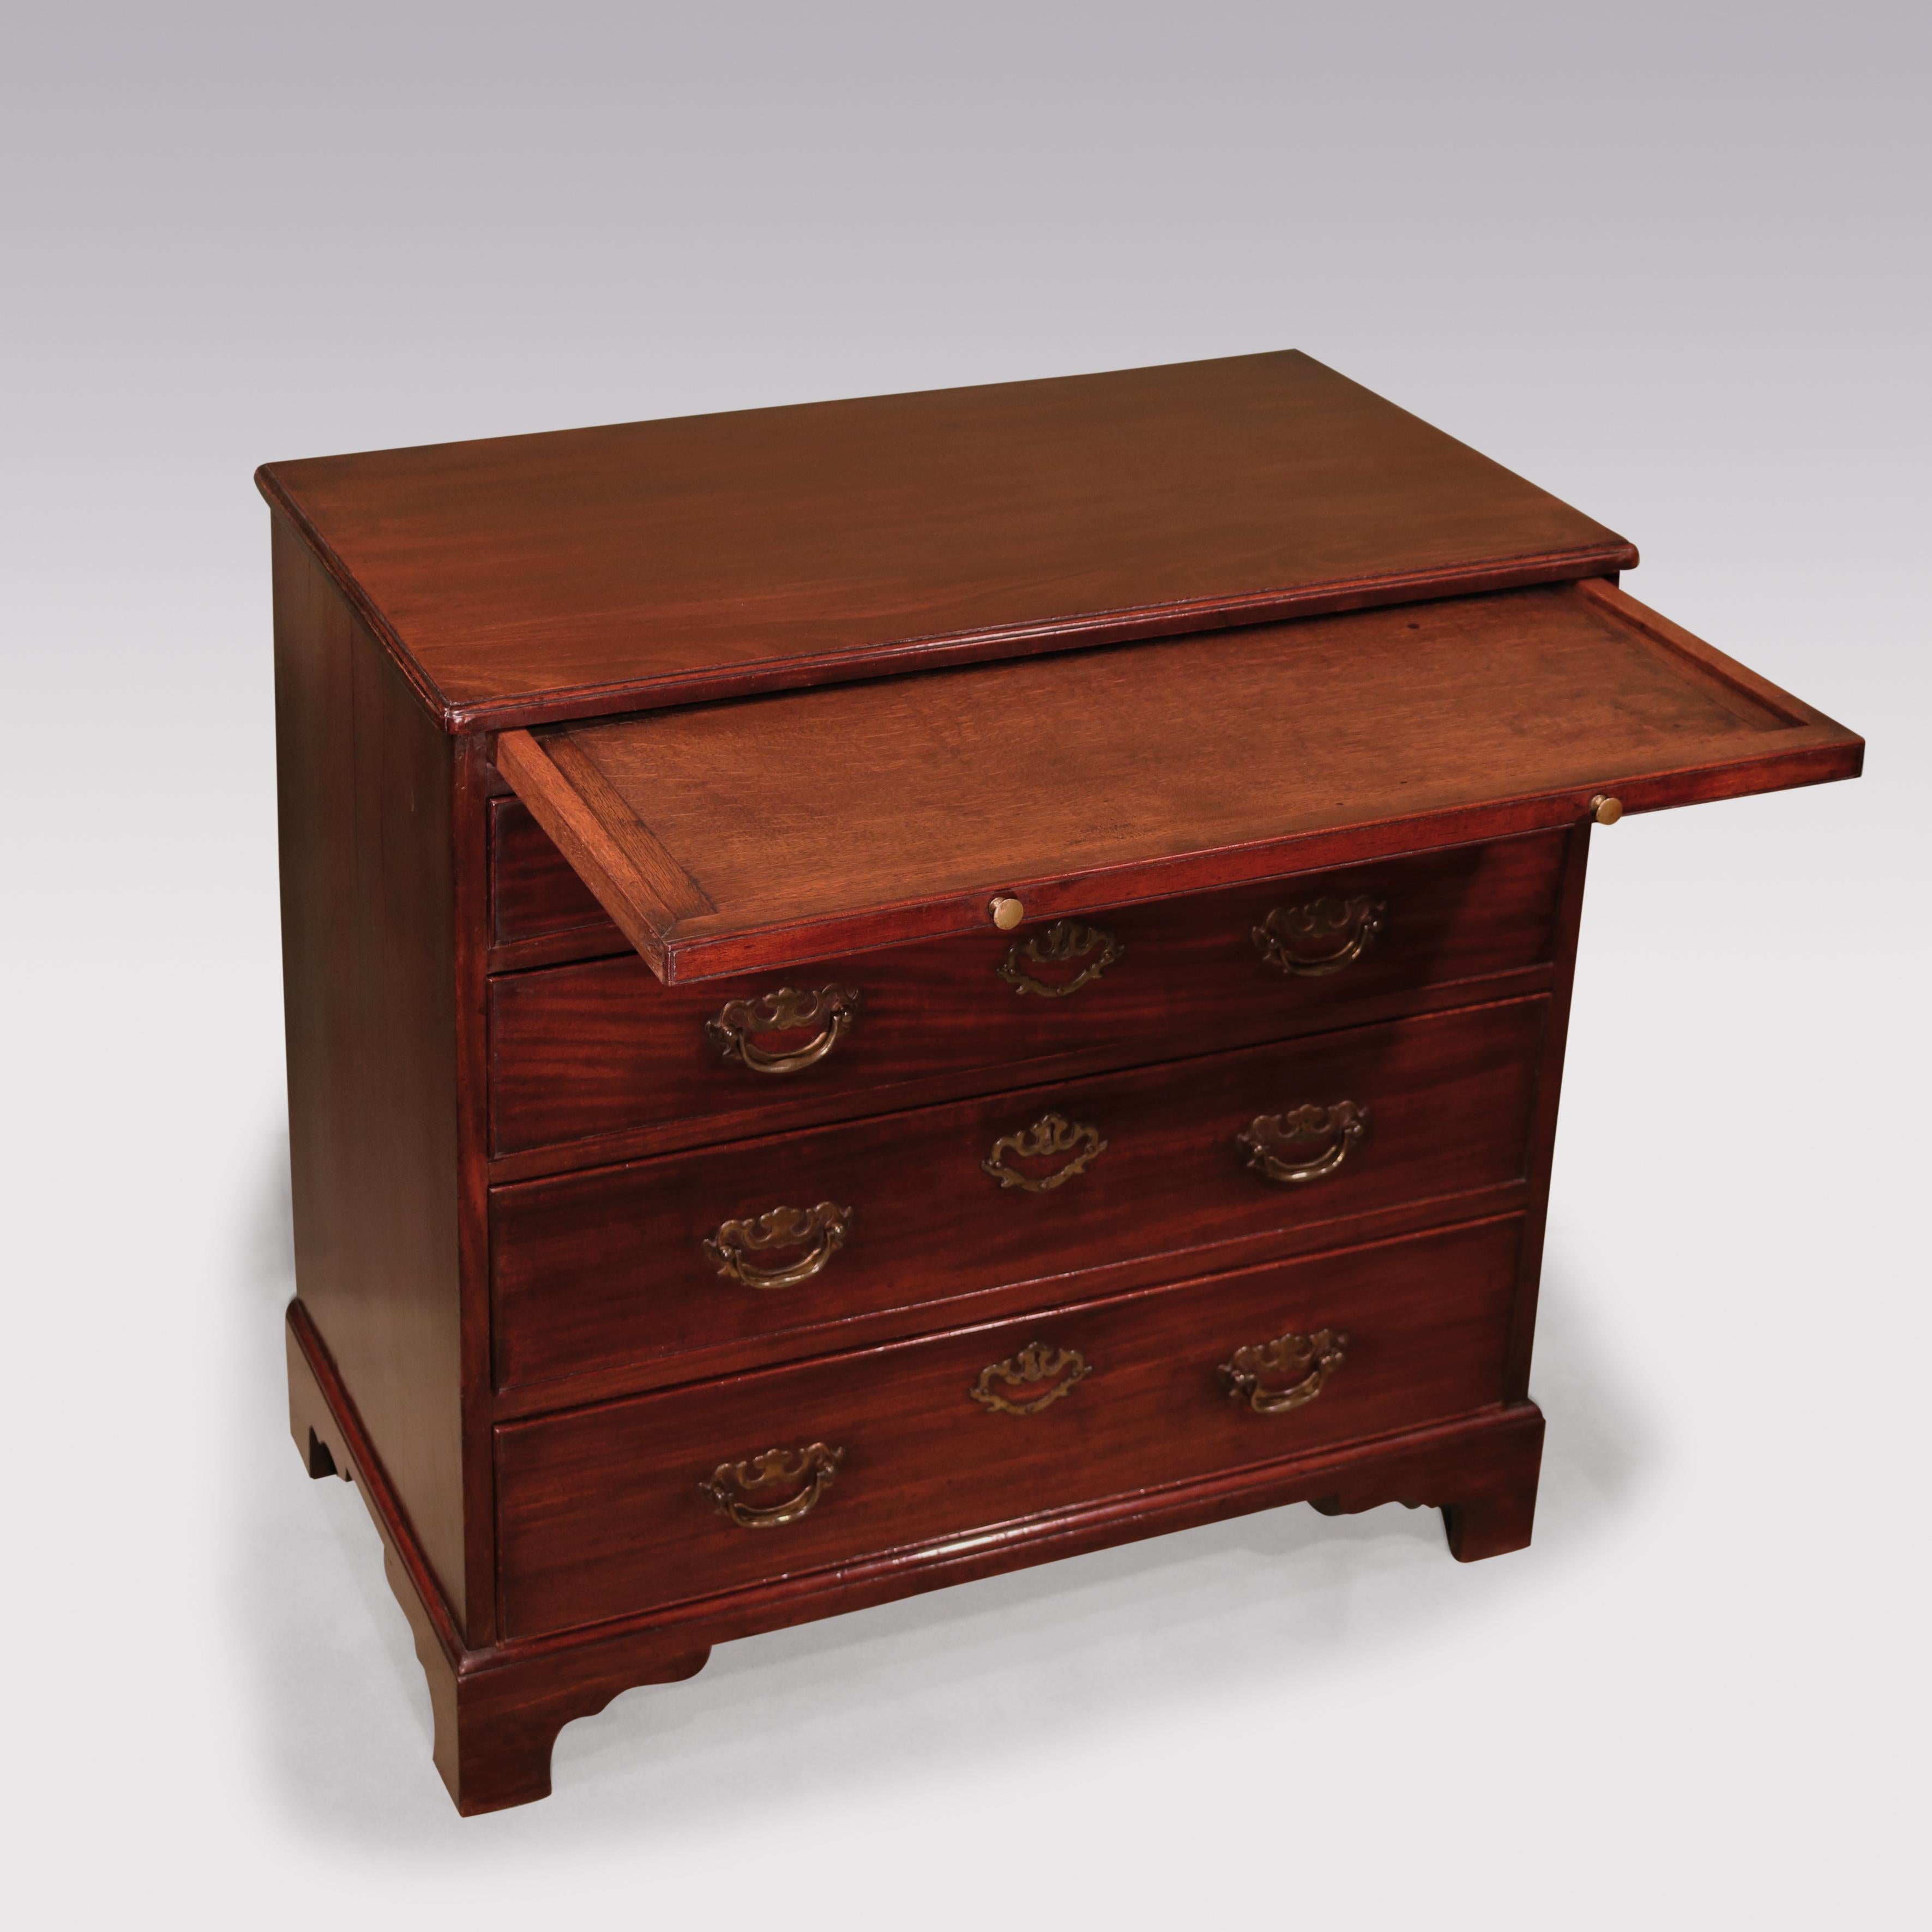 A mid-18th century George III period mahogany straight front chest of drawers. Having a moulded edge top above a brushing slide, fitted with four graduated cockbeaded drawers, retaining original pierced back plate handles and supported on original